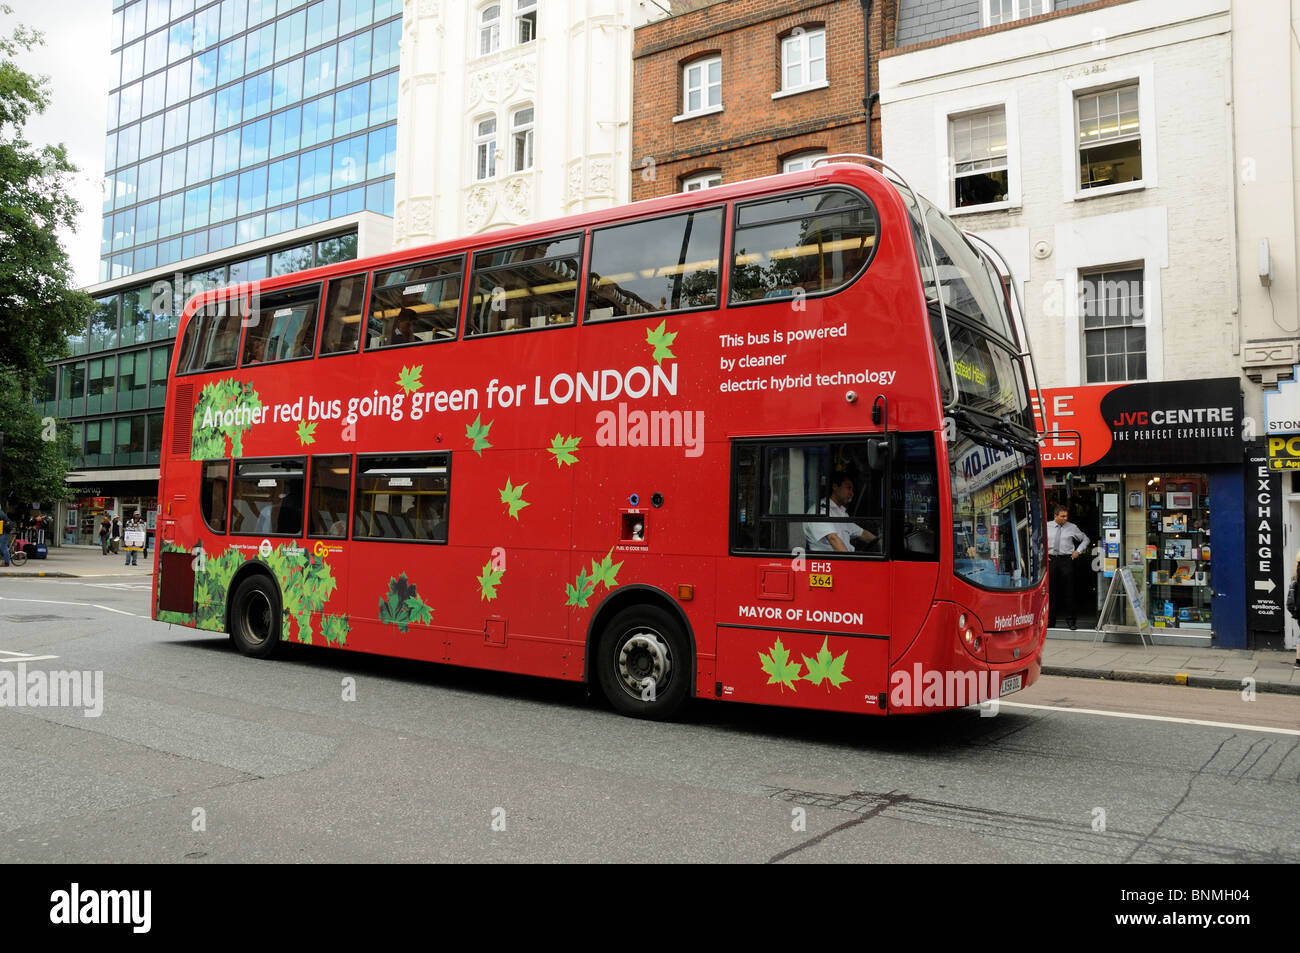 Red London bus powered by electric hybrid technology Tottenham Court Road England UK Stock Photo